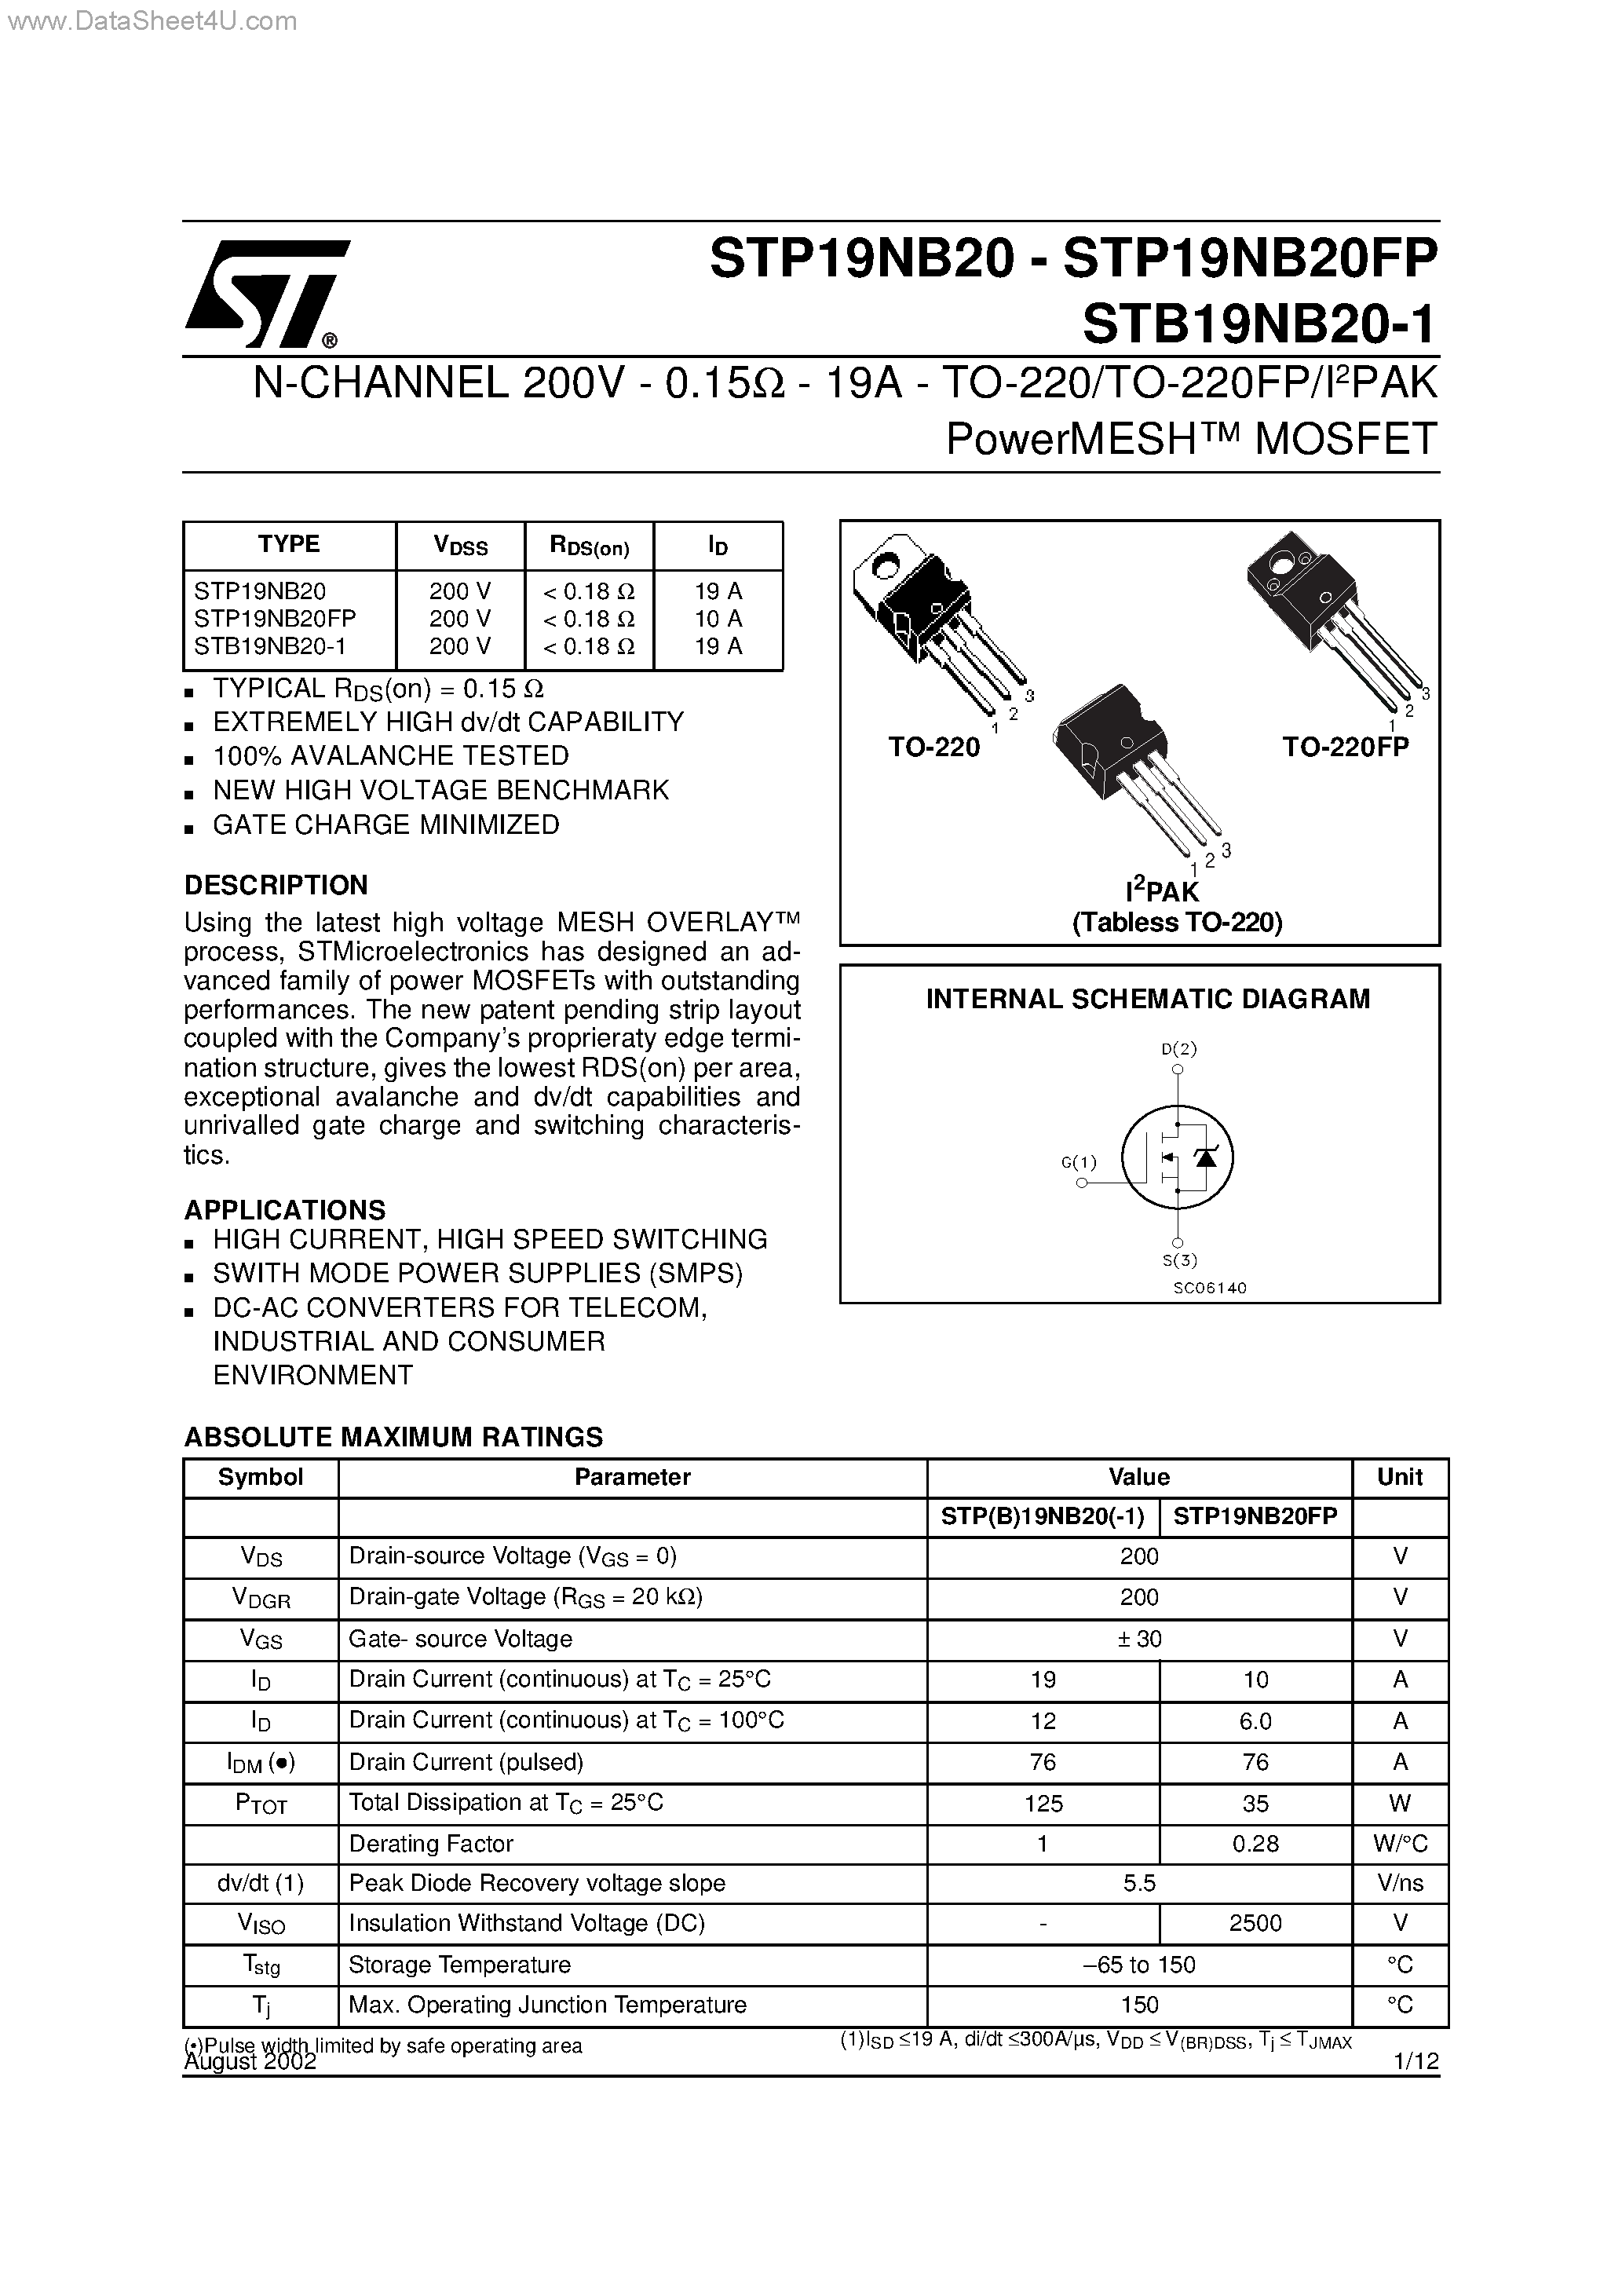 Datasheet STP19NB20 - N-CHANNEL MOSFET page 1